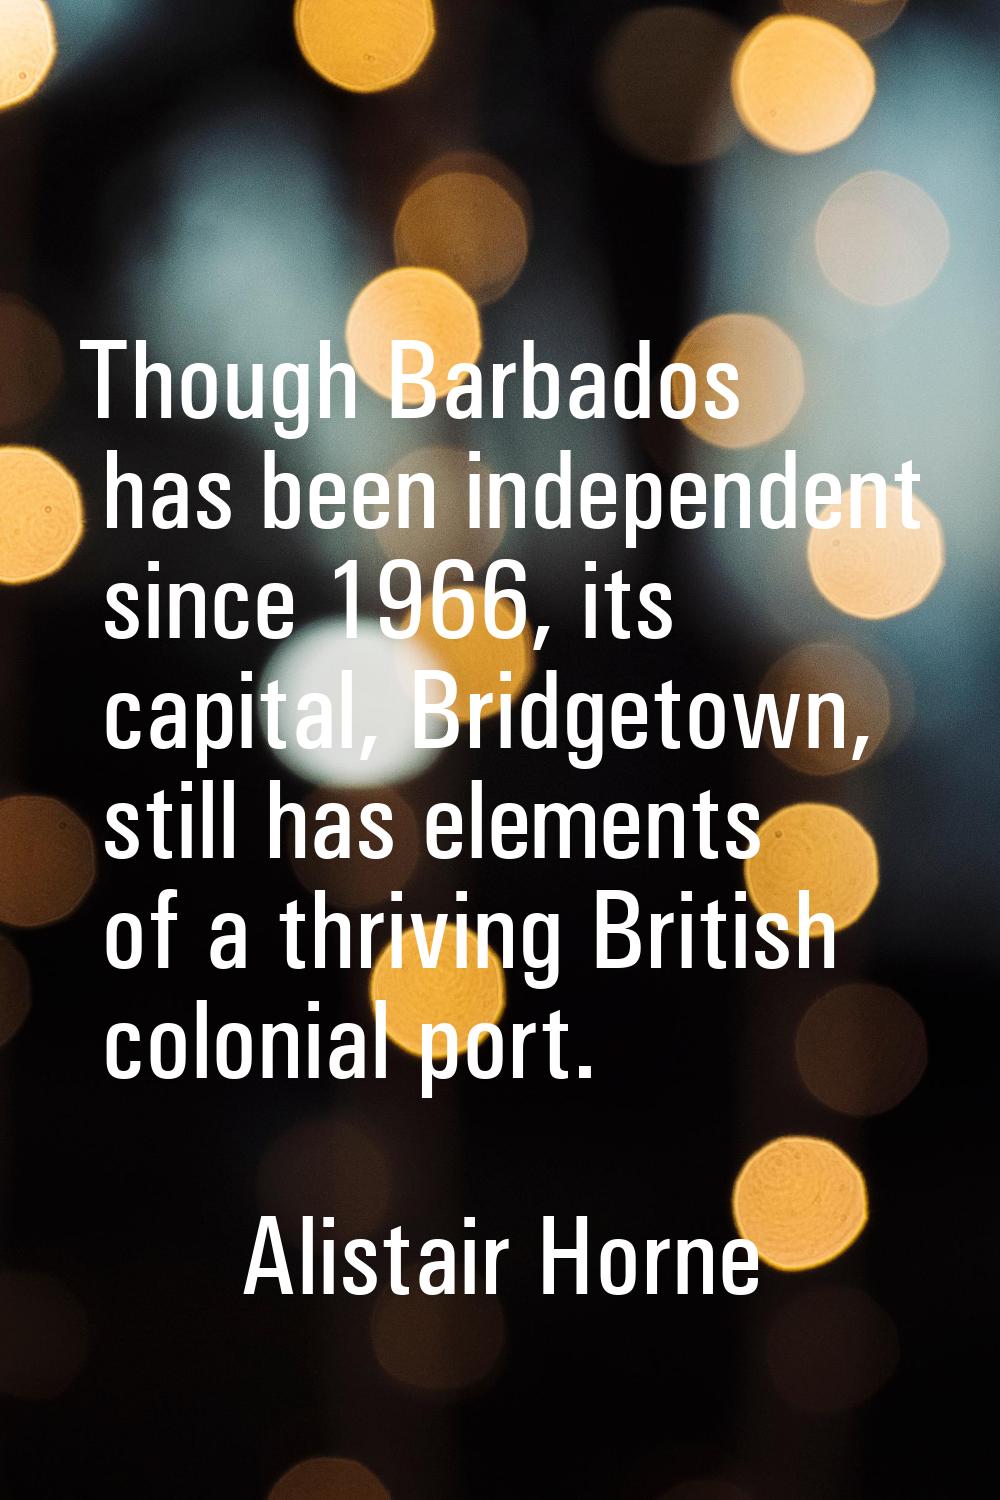 Though Barbados has been independent since 1966, its capital, Bridgetown, still has elements of a t